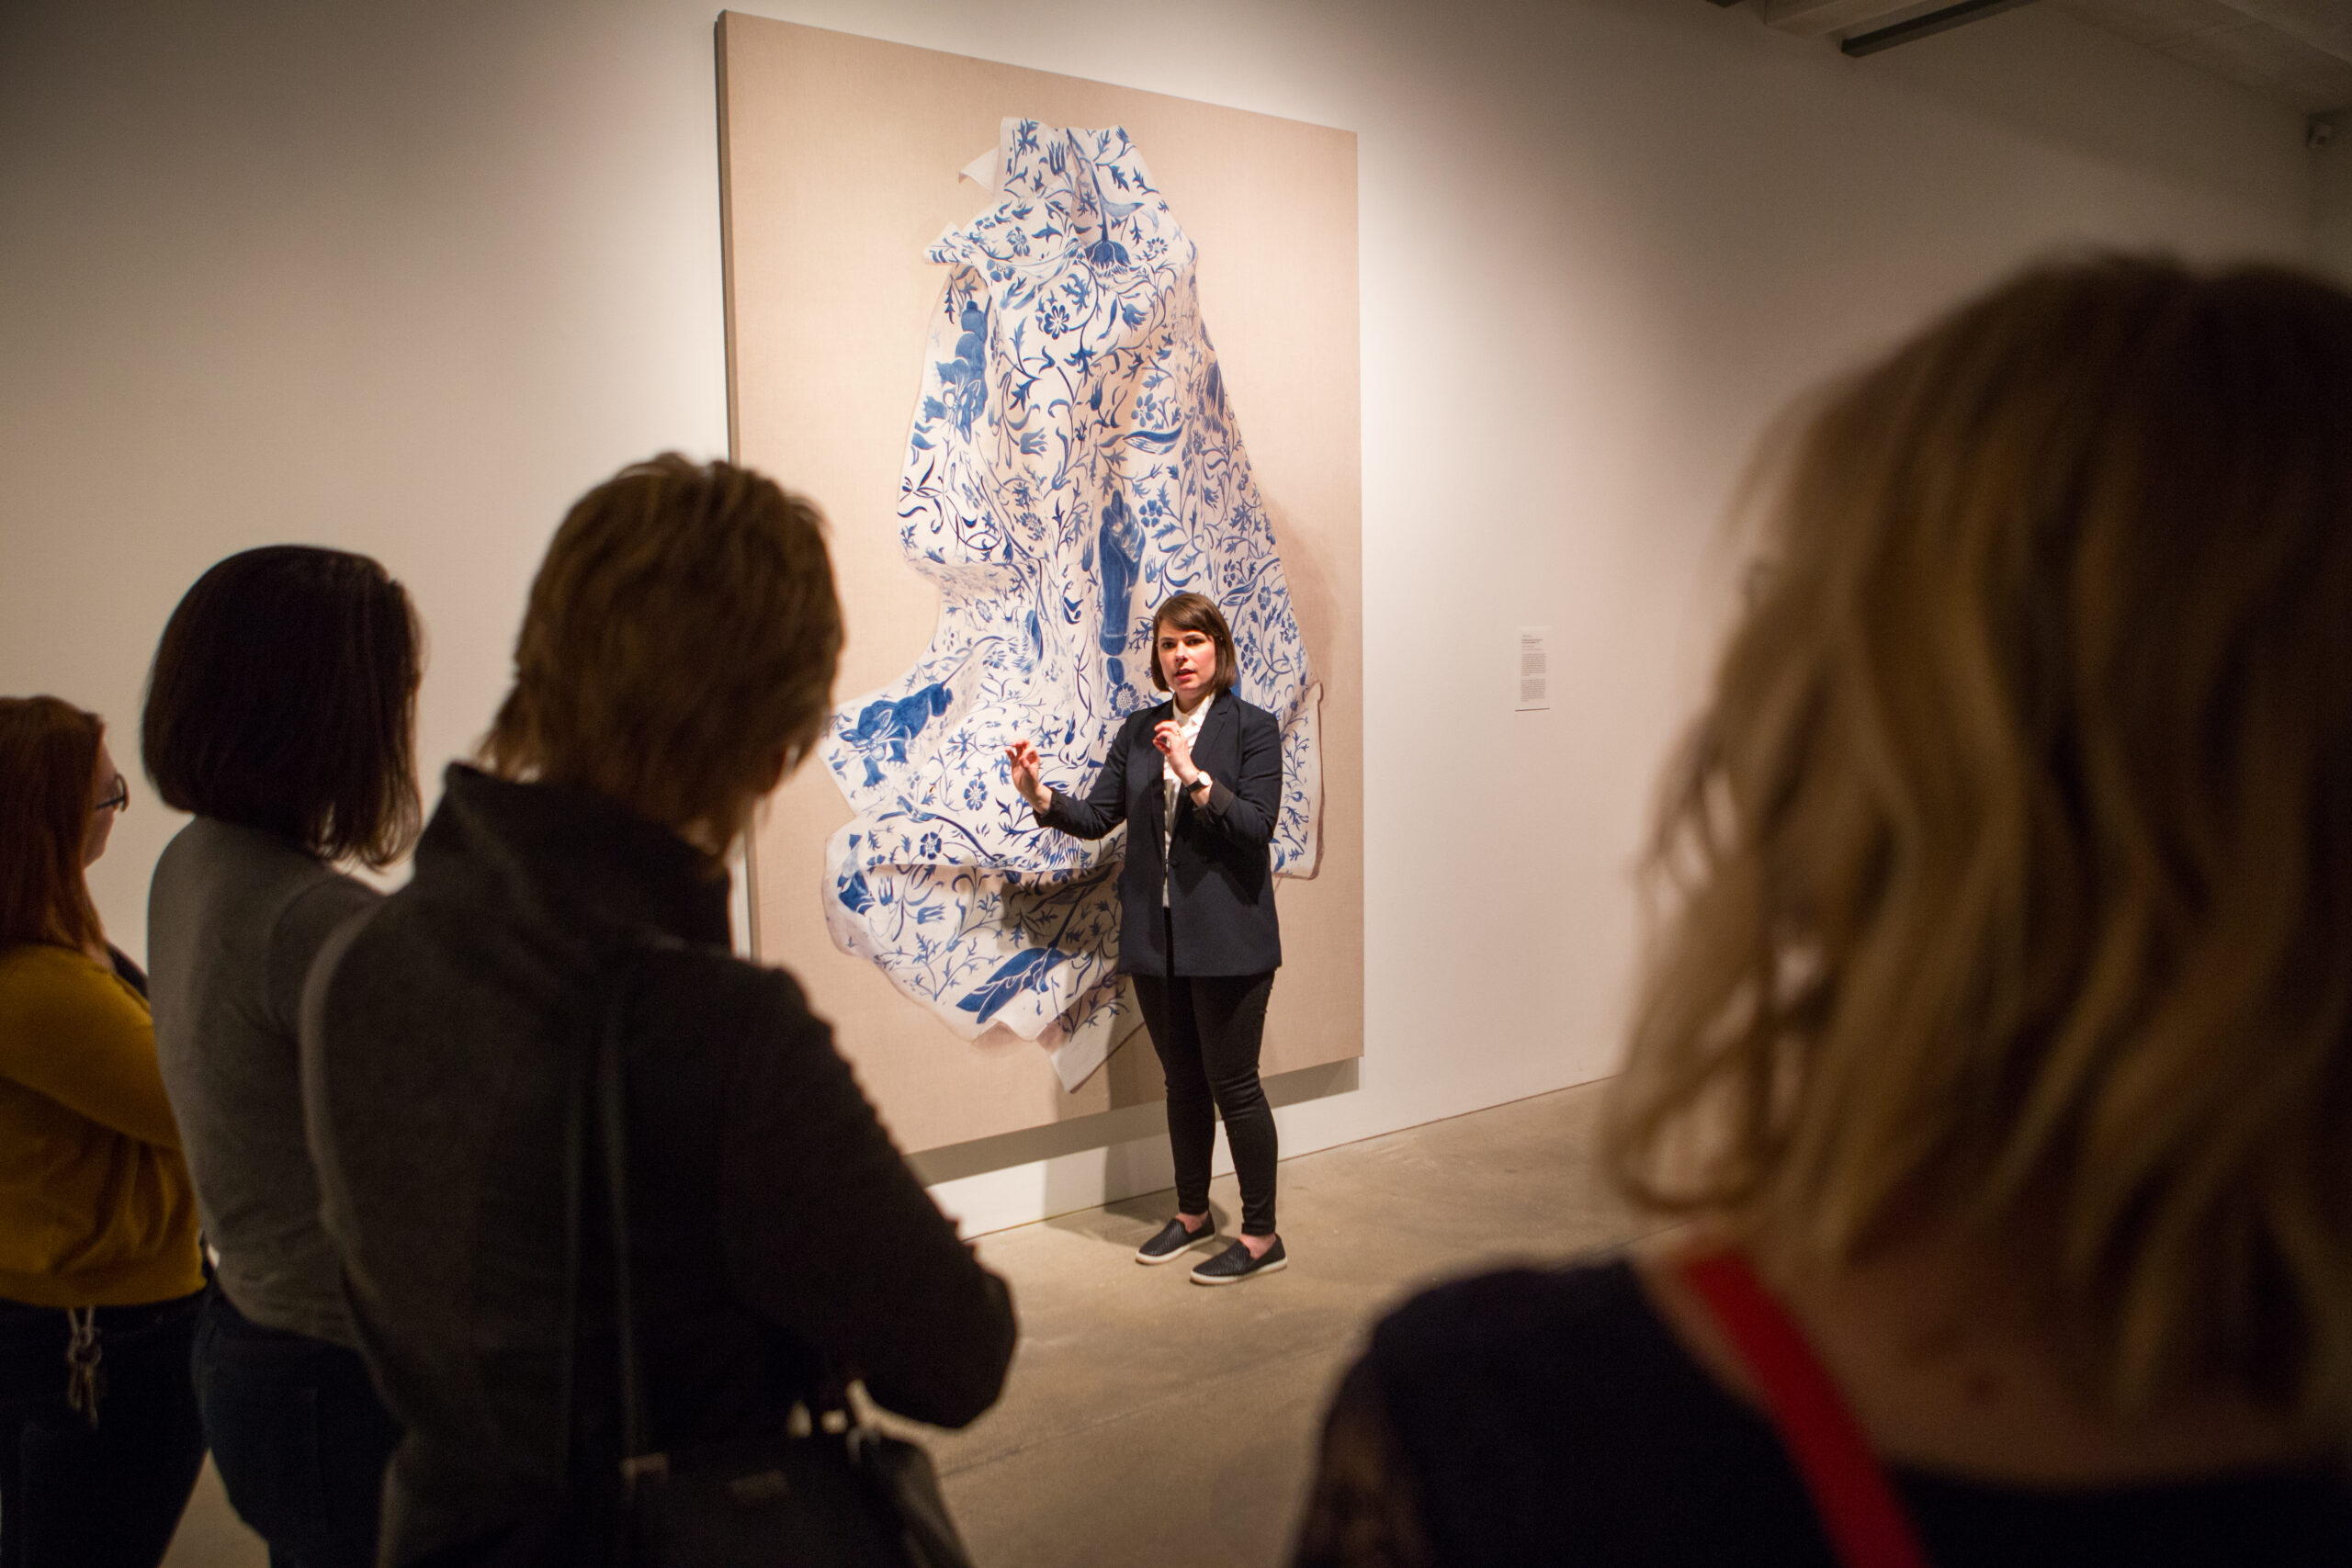 A woman with short brown hair gestures towards a large painting of fabric decorated with delicate blue designs at a Sip and Sketch event.